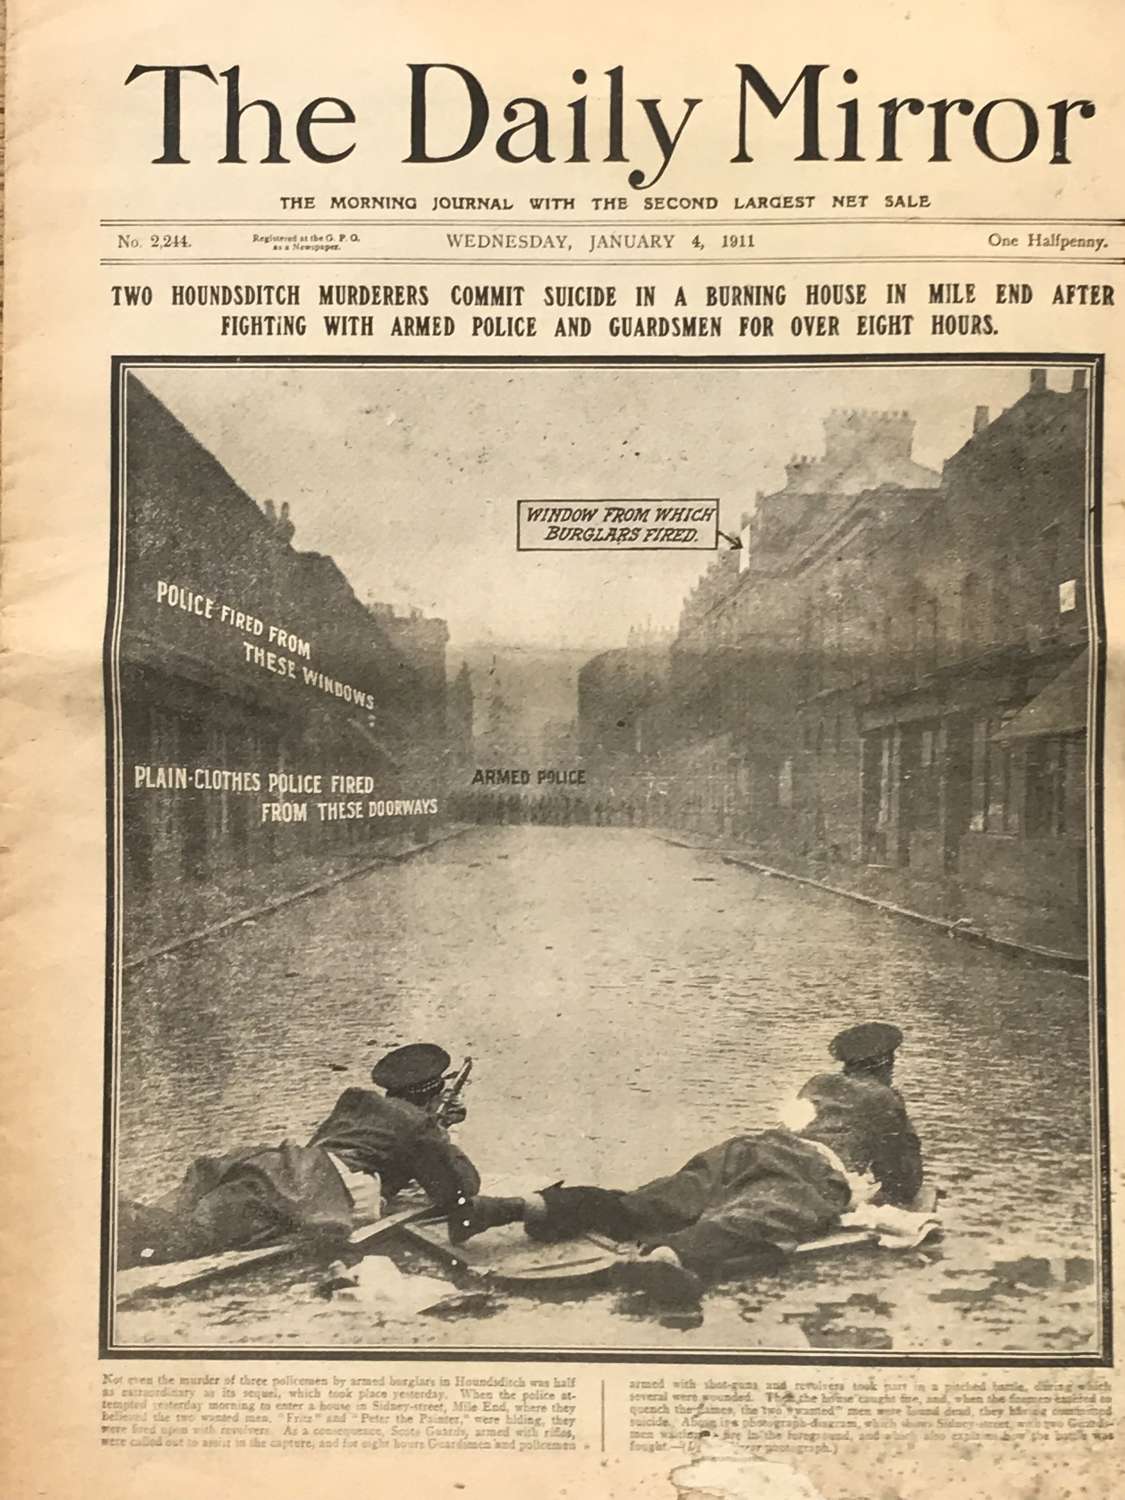 Daily Mirror 4th January 1911 siege of Sidney  Street